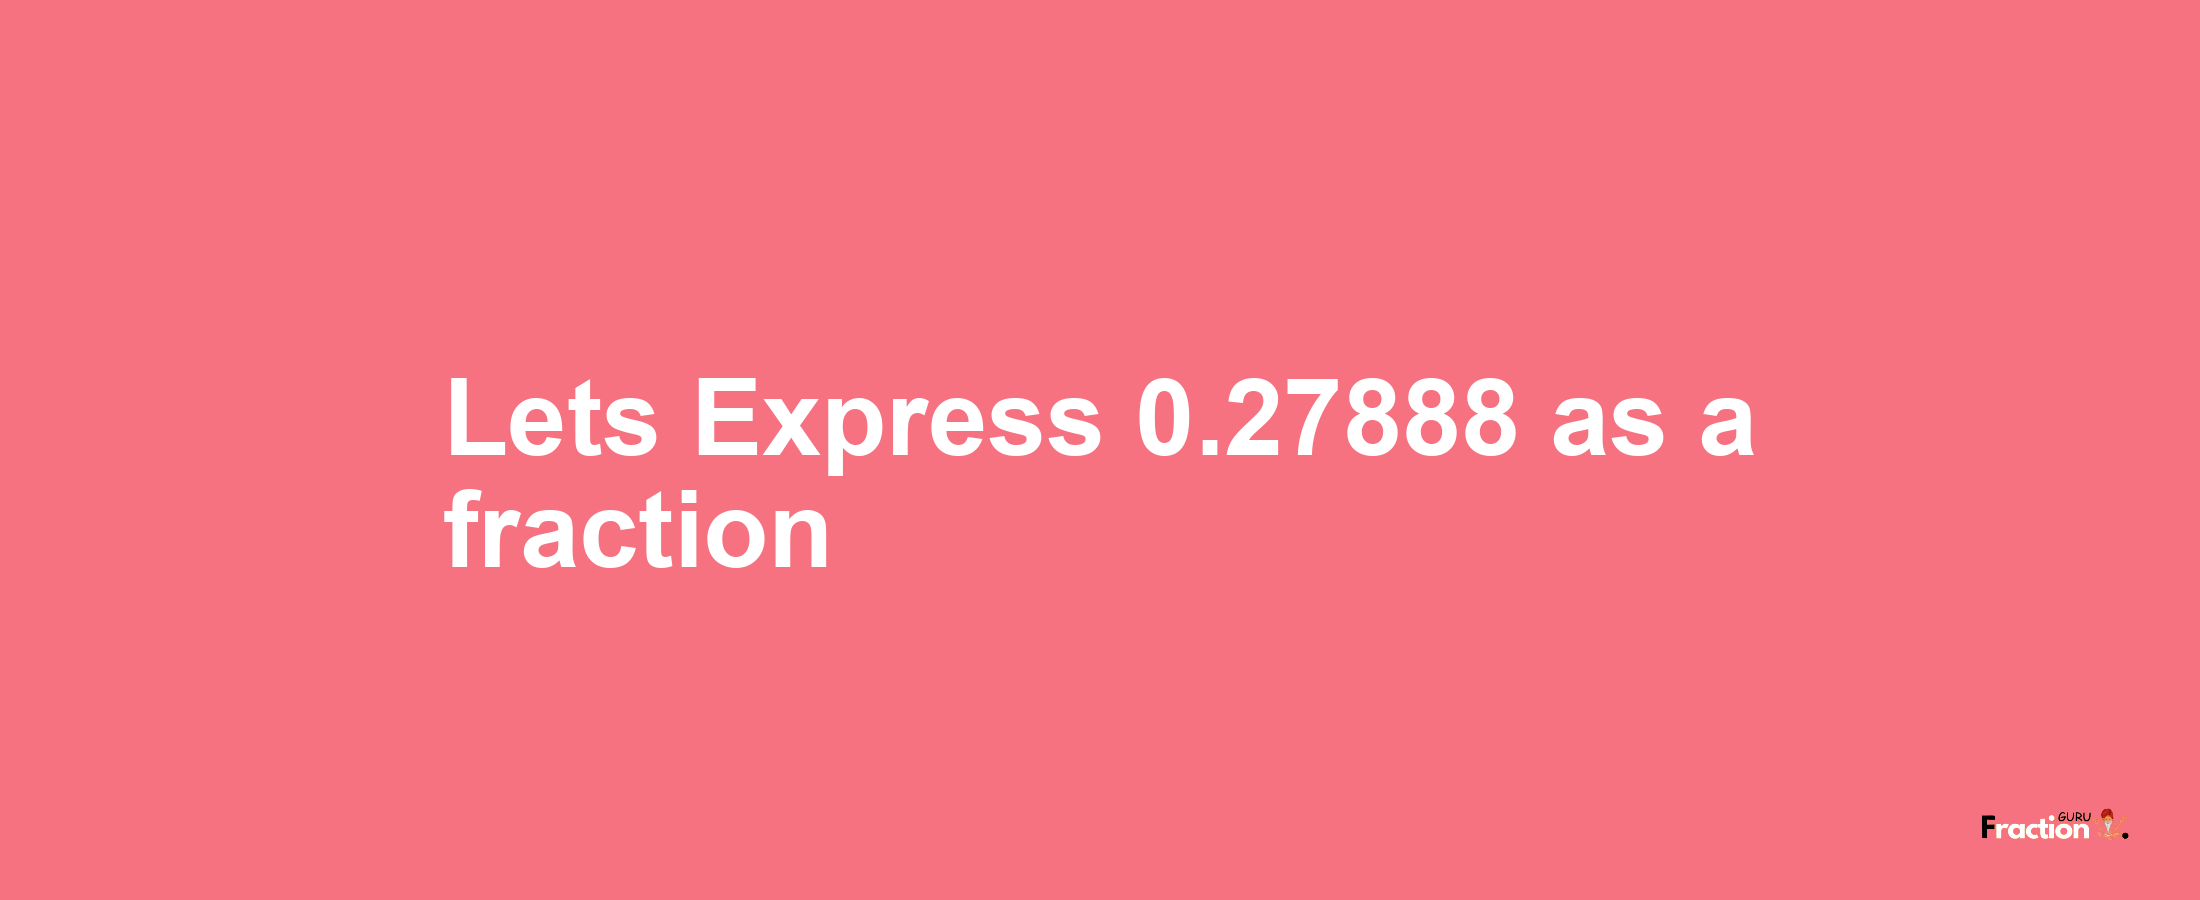 Lets Express 0.27888 as afraction